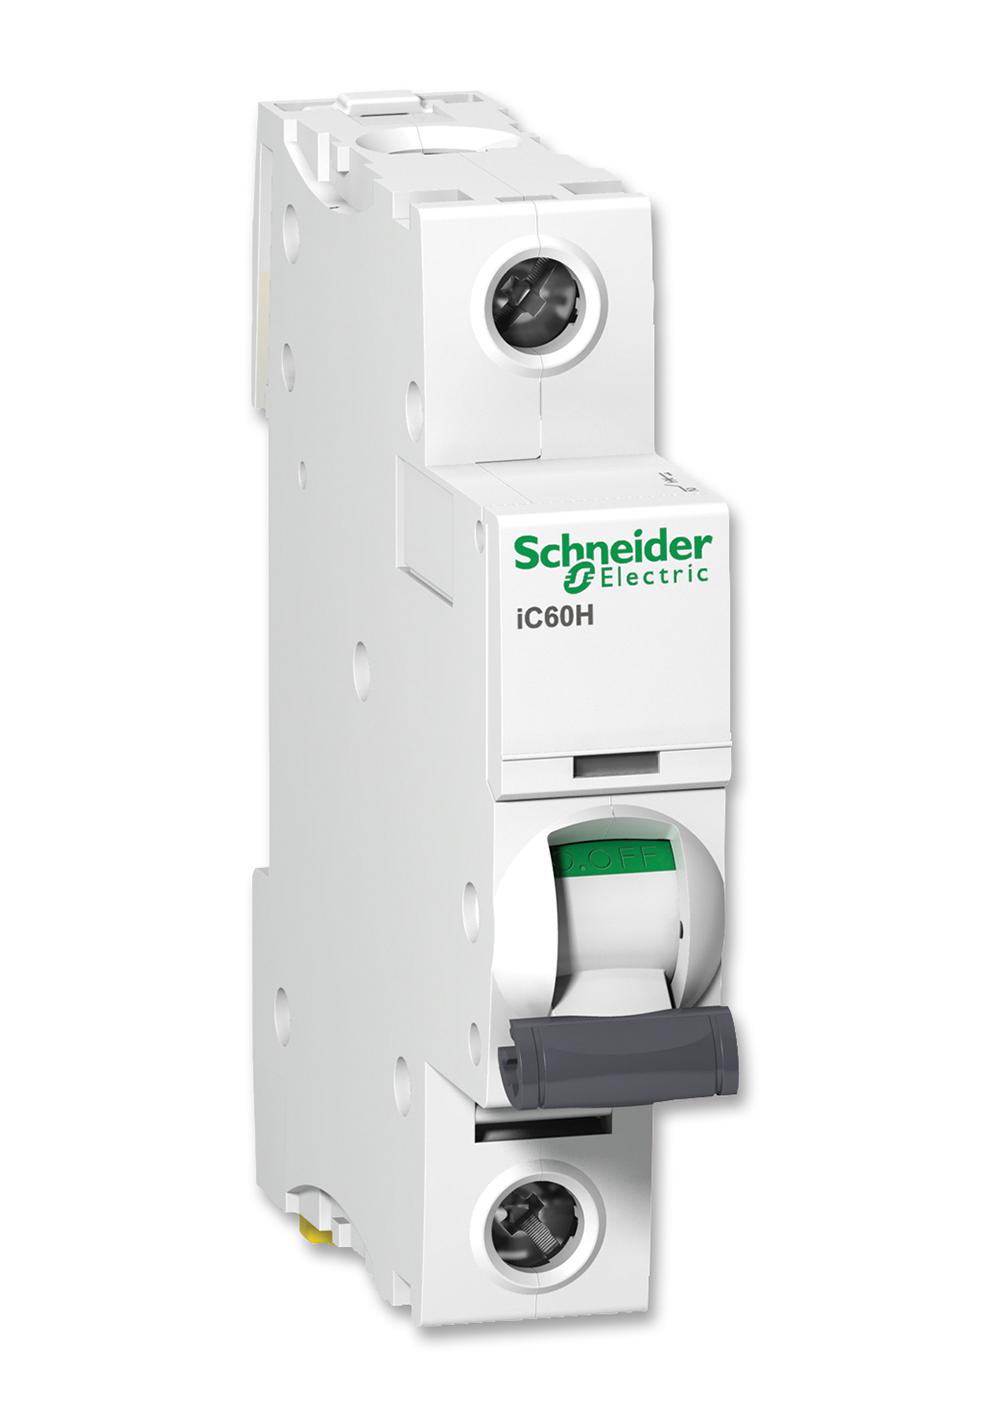 A9F55120 CIRCUIT BREAKER, THERMAL MAGNETIC, 1POLE SCHNEIDER ELECTRIC